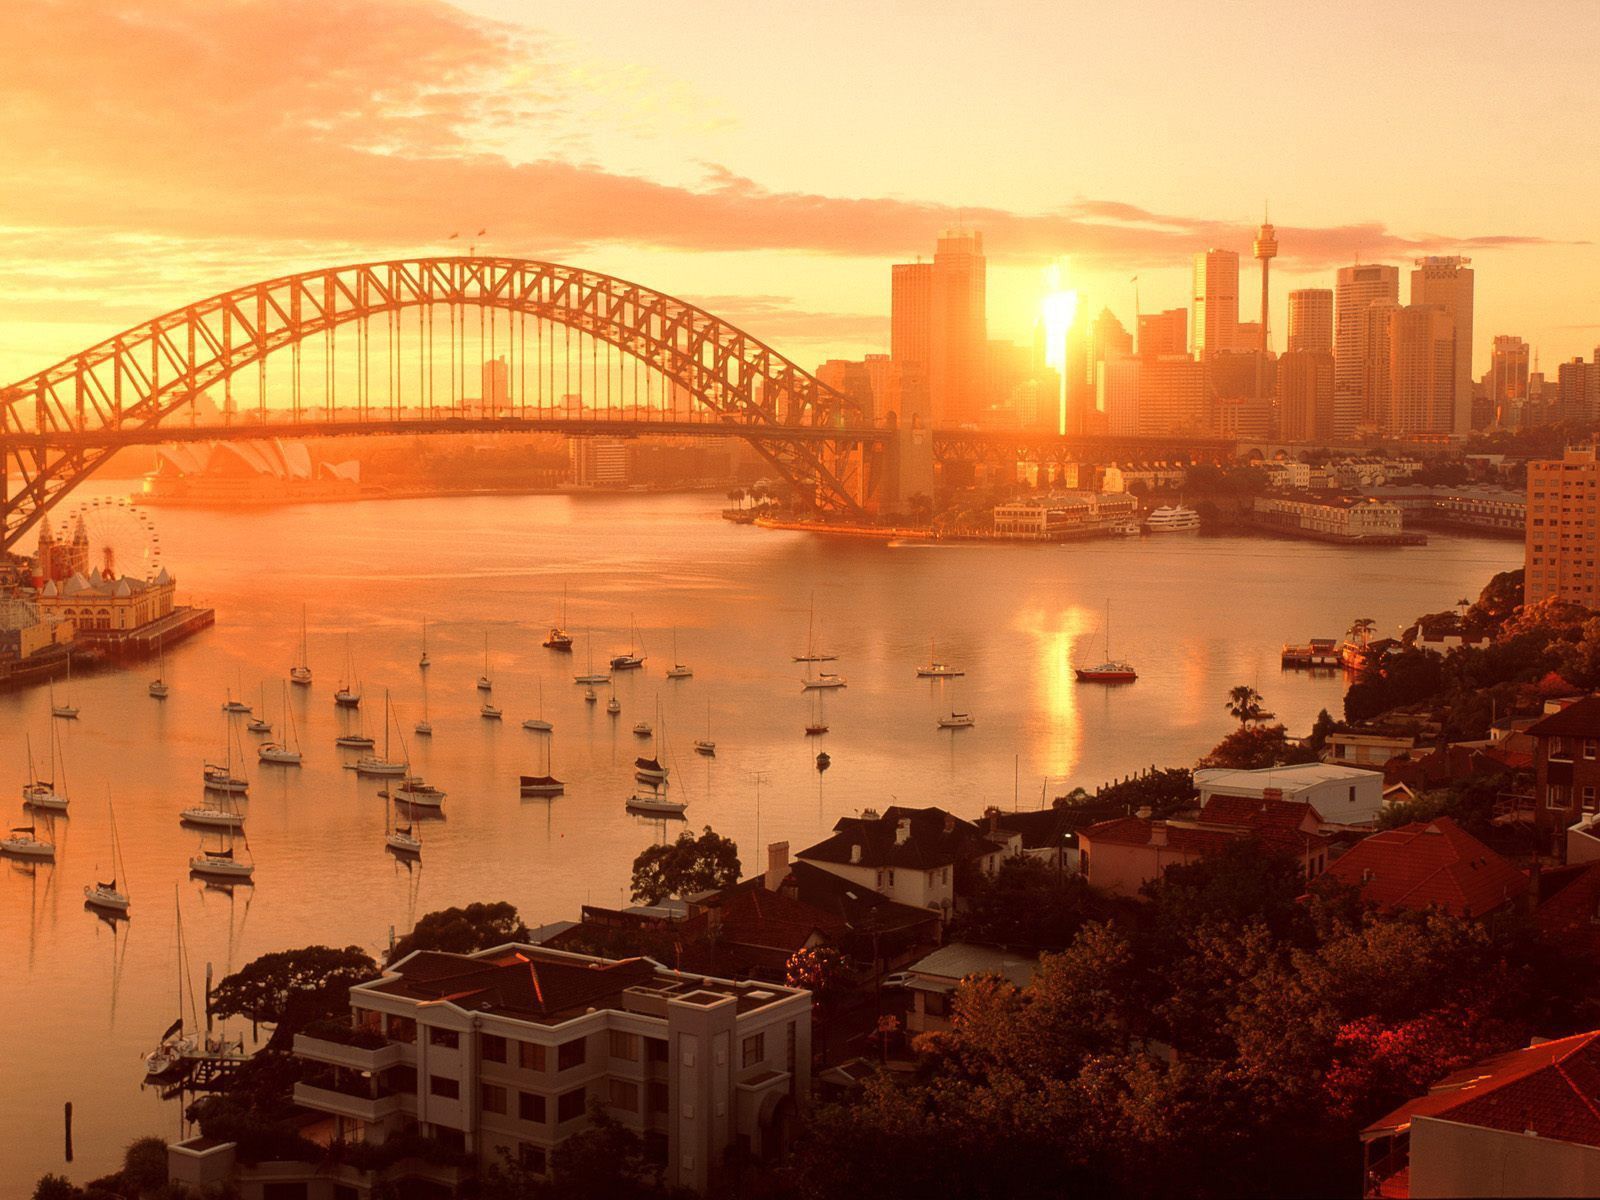 Sun kissed Sydney wallpapers and images - wallpapers, pictures, photos